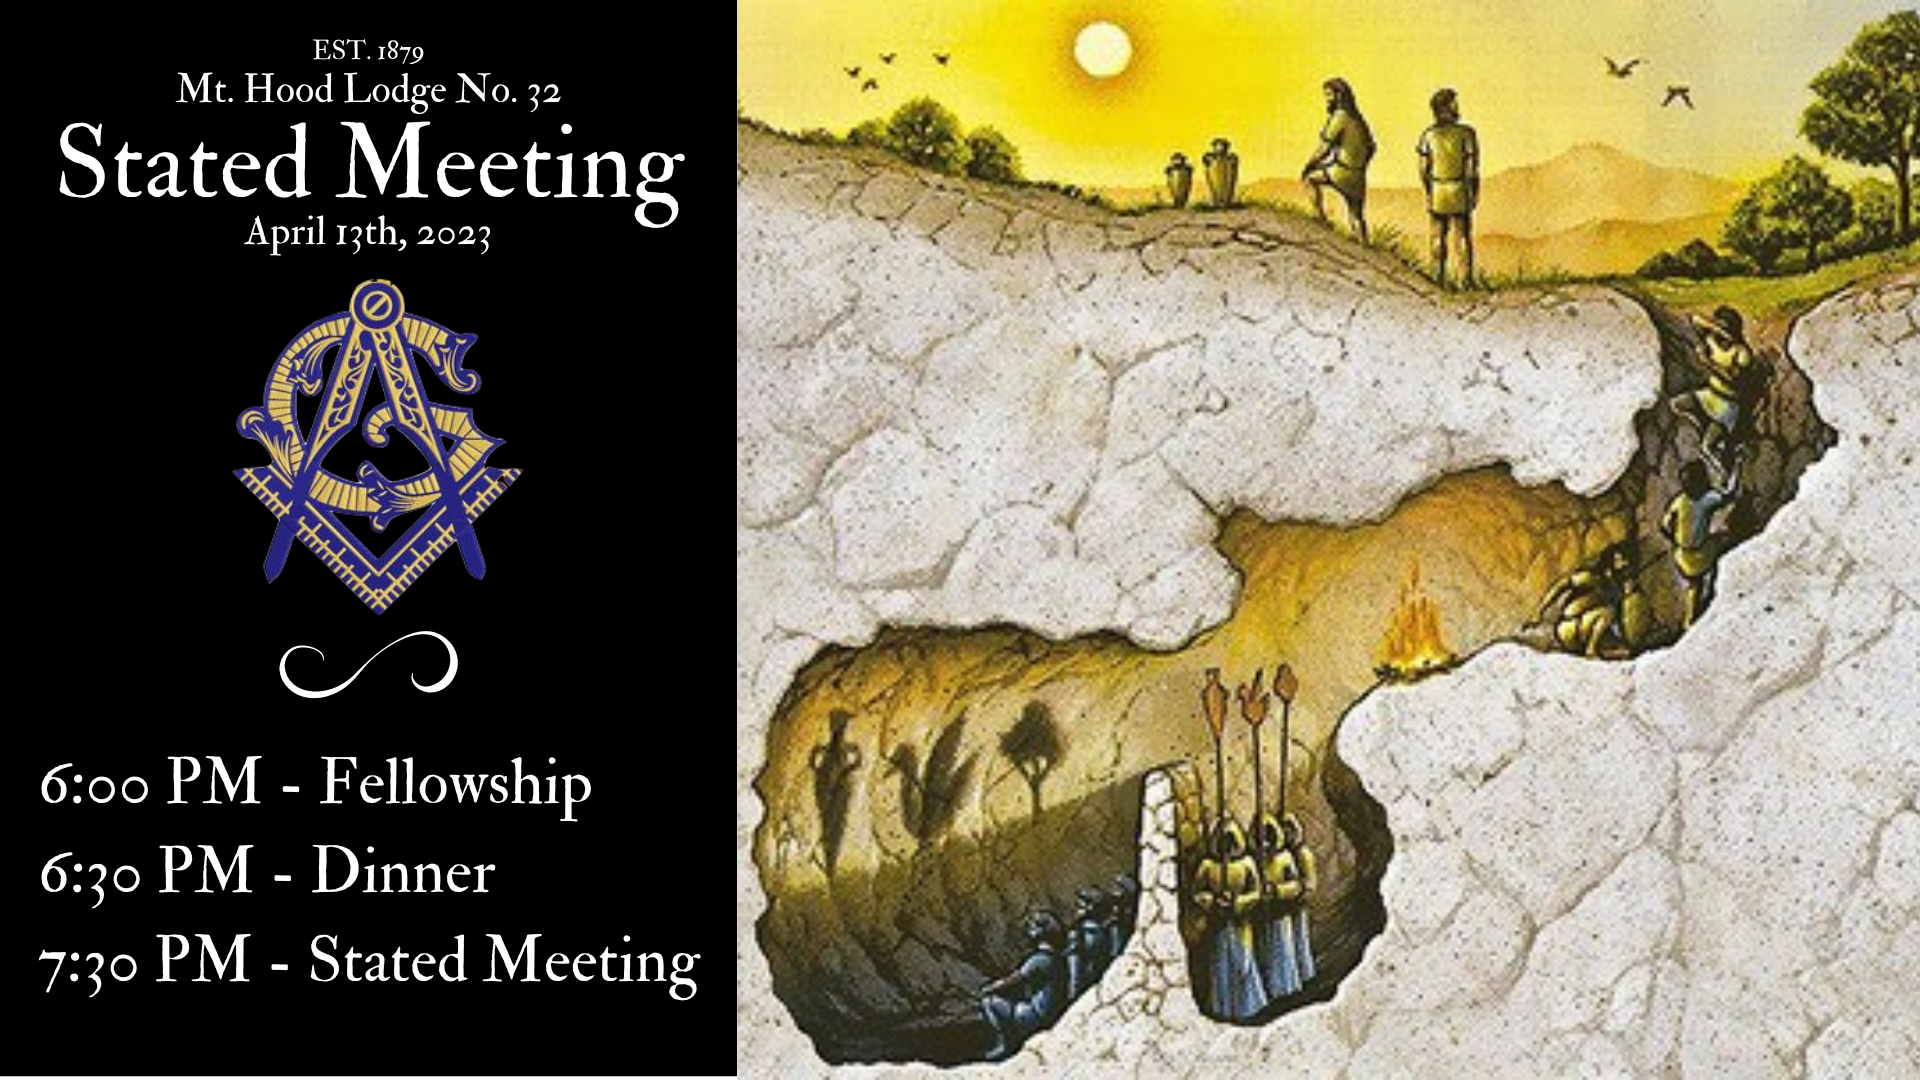 Stated Meeting – Apr. 13th, 2023